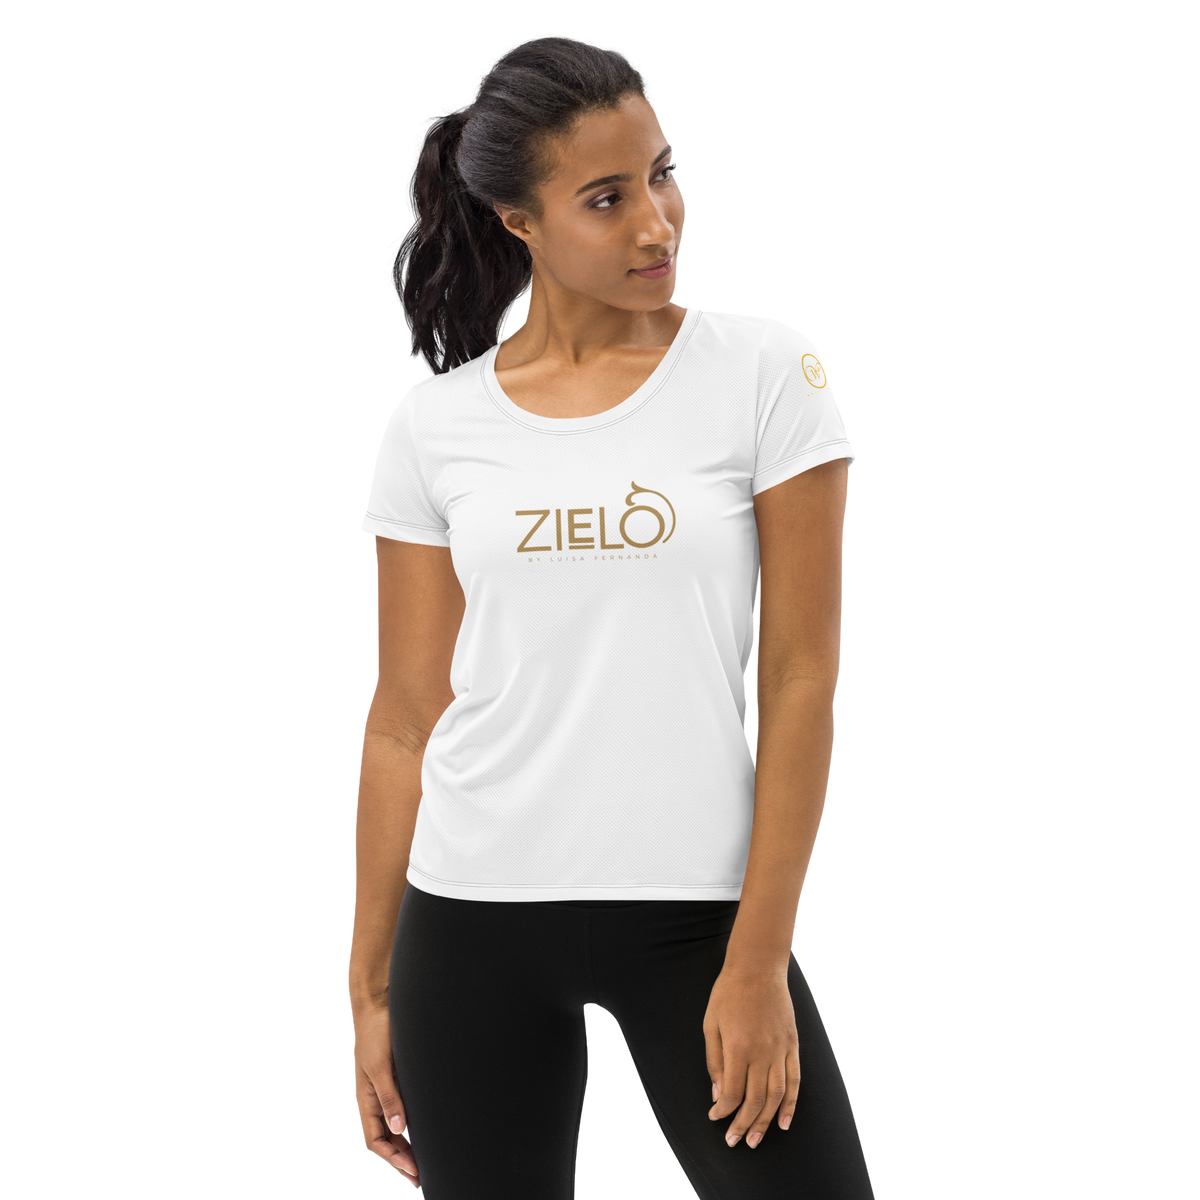 Zielo Women's Athletic T-shirt For service providers